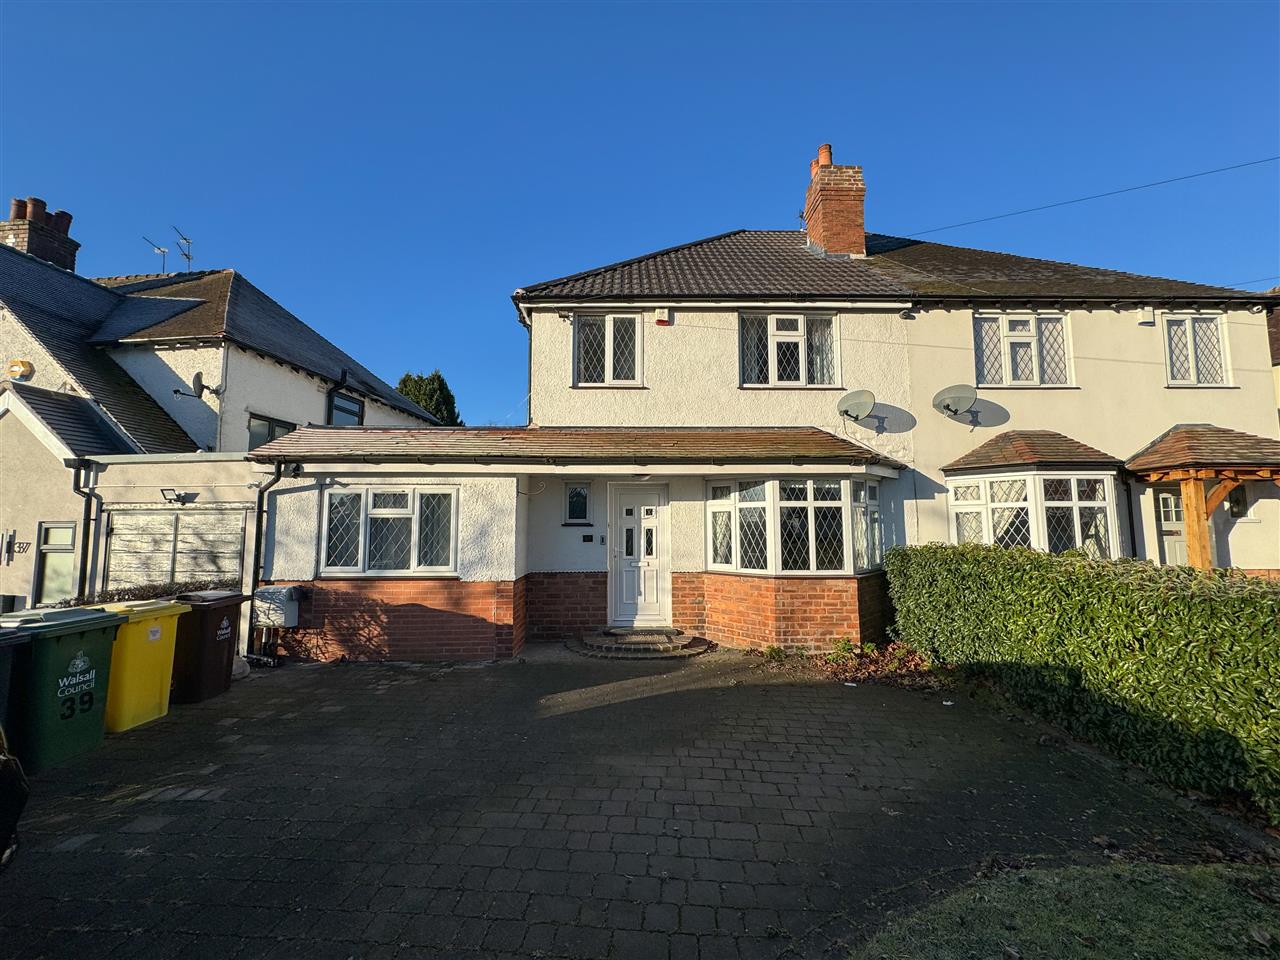 4 bed Semi-Detached House for rent in Walsall. From Partridge Homes - Yardley